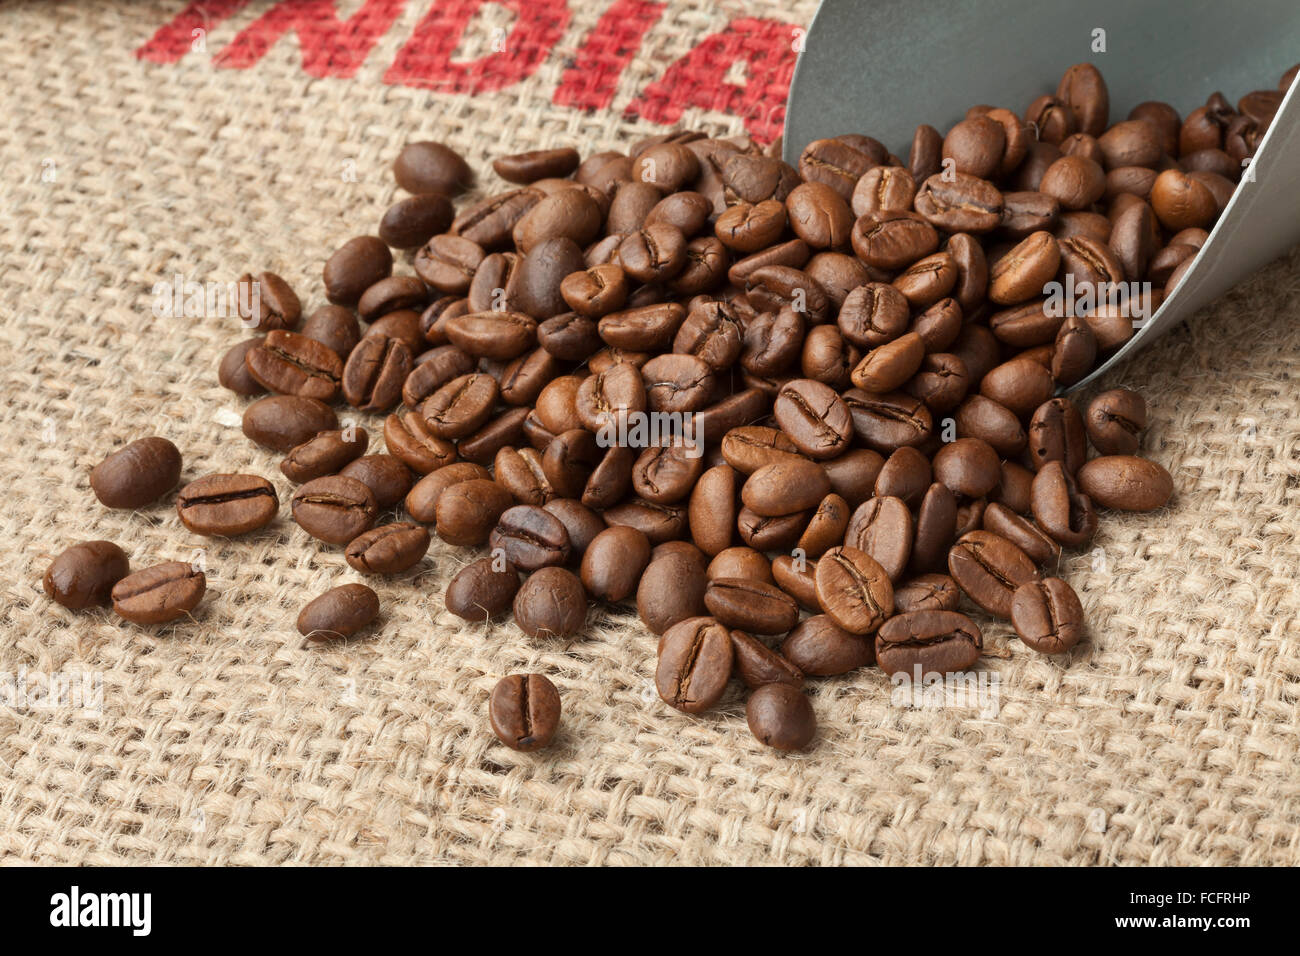 Roasted  Malabar coffee beans from India on a jute bag Stock Photo